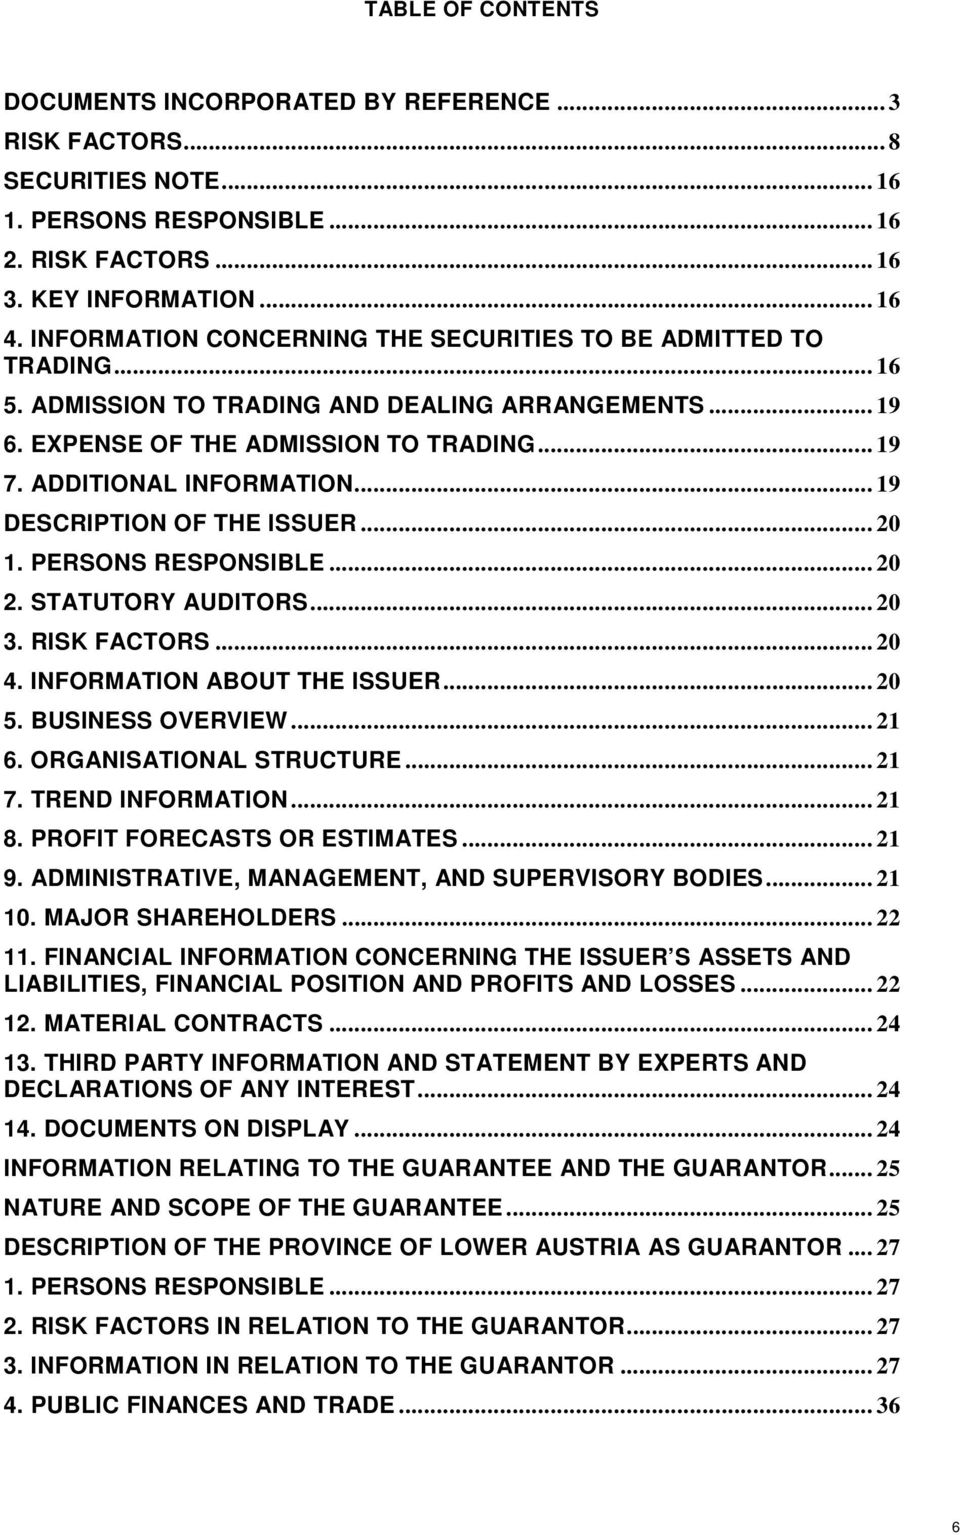 .. 19 DESCRIPTION OF THE ISSUER... 20 1. PERSONS RESPONSIBLE... 20 2. STATUTORY AUDITORS... 20 3. RISK FACTORS... 20 4. INFORMATION ABOUT THE ISSUER... 20 5. BUSINESS OVERVIEW... 21 6.